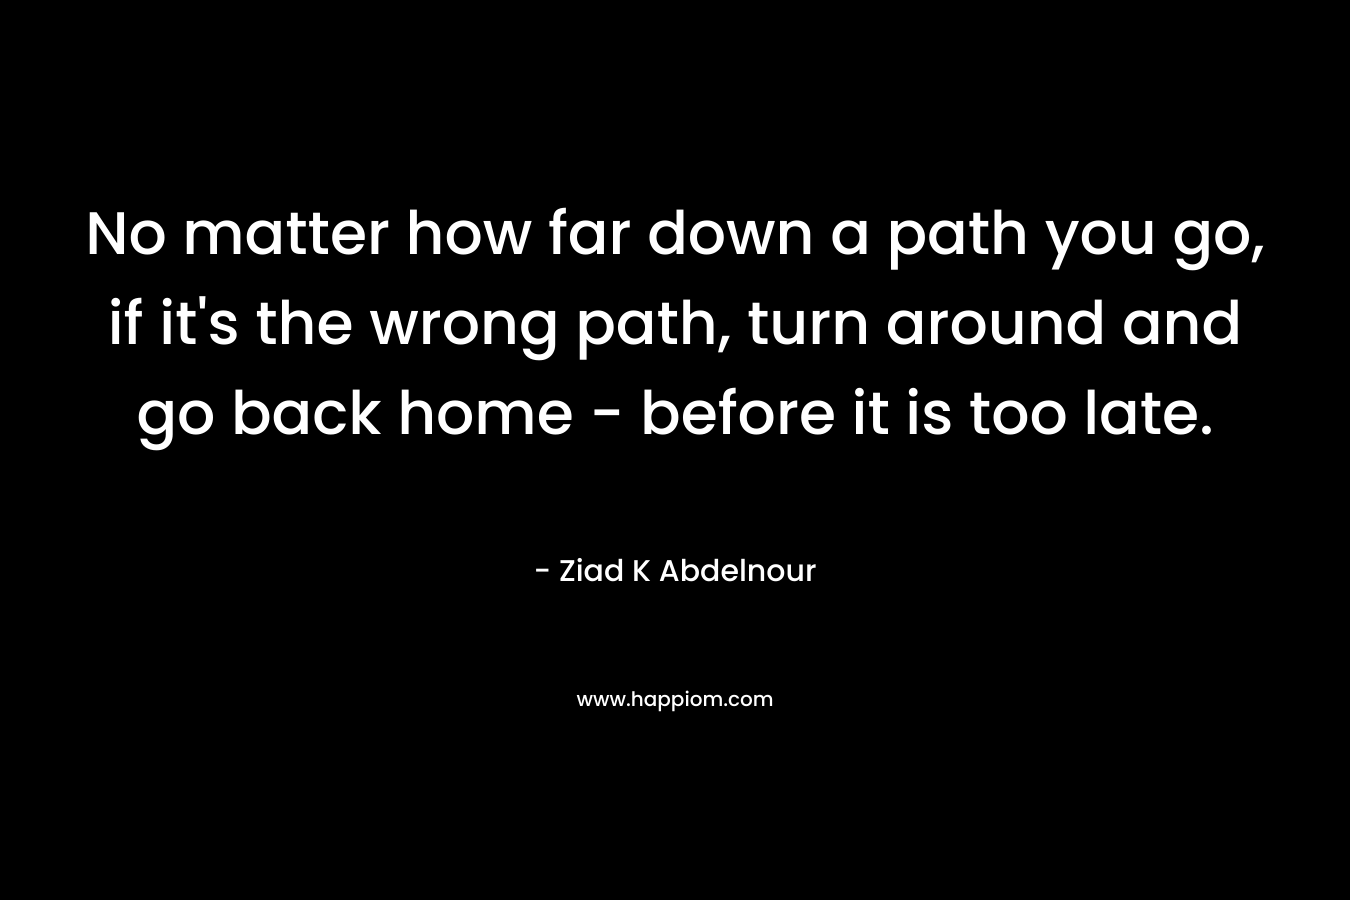 No matter how far down a path you go, if it’s the wrong path, turn around and go back home – before it is too late. – Ziad K Abdelnour